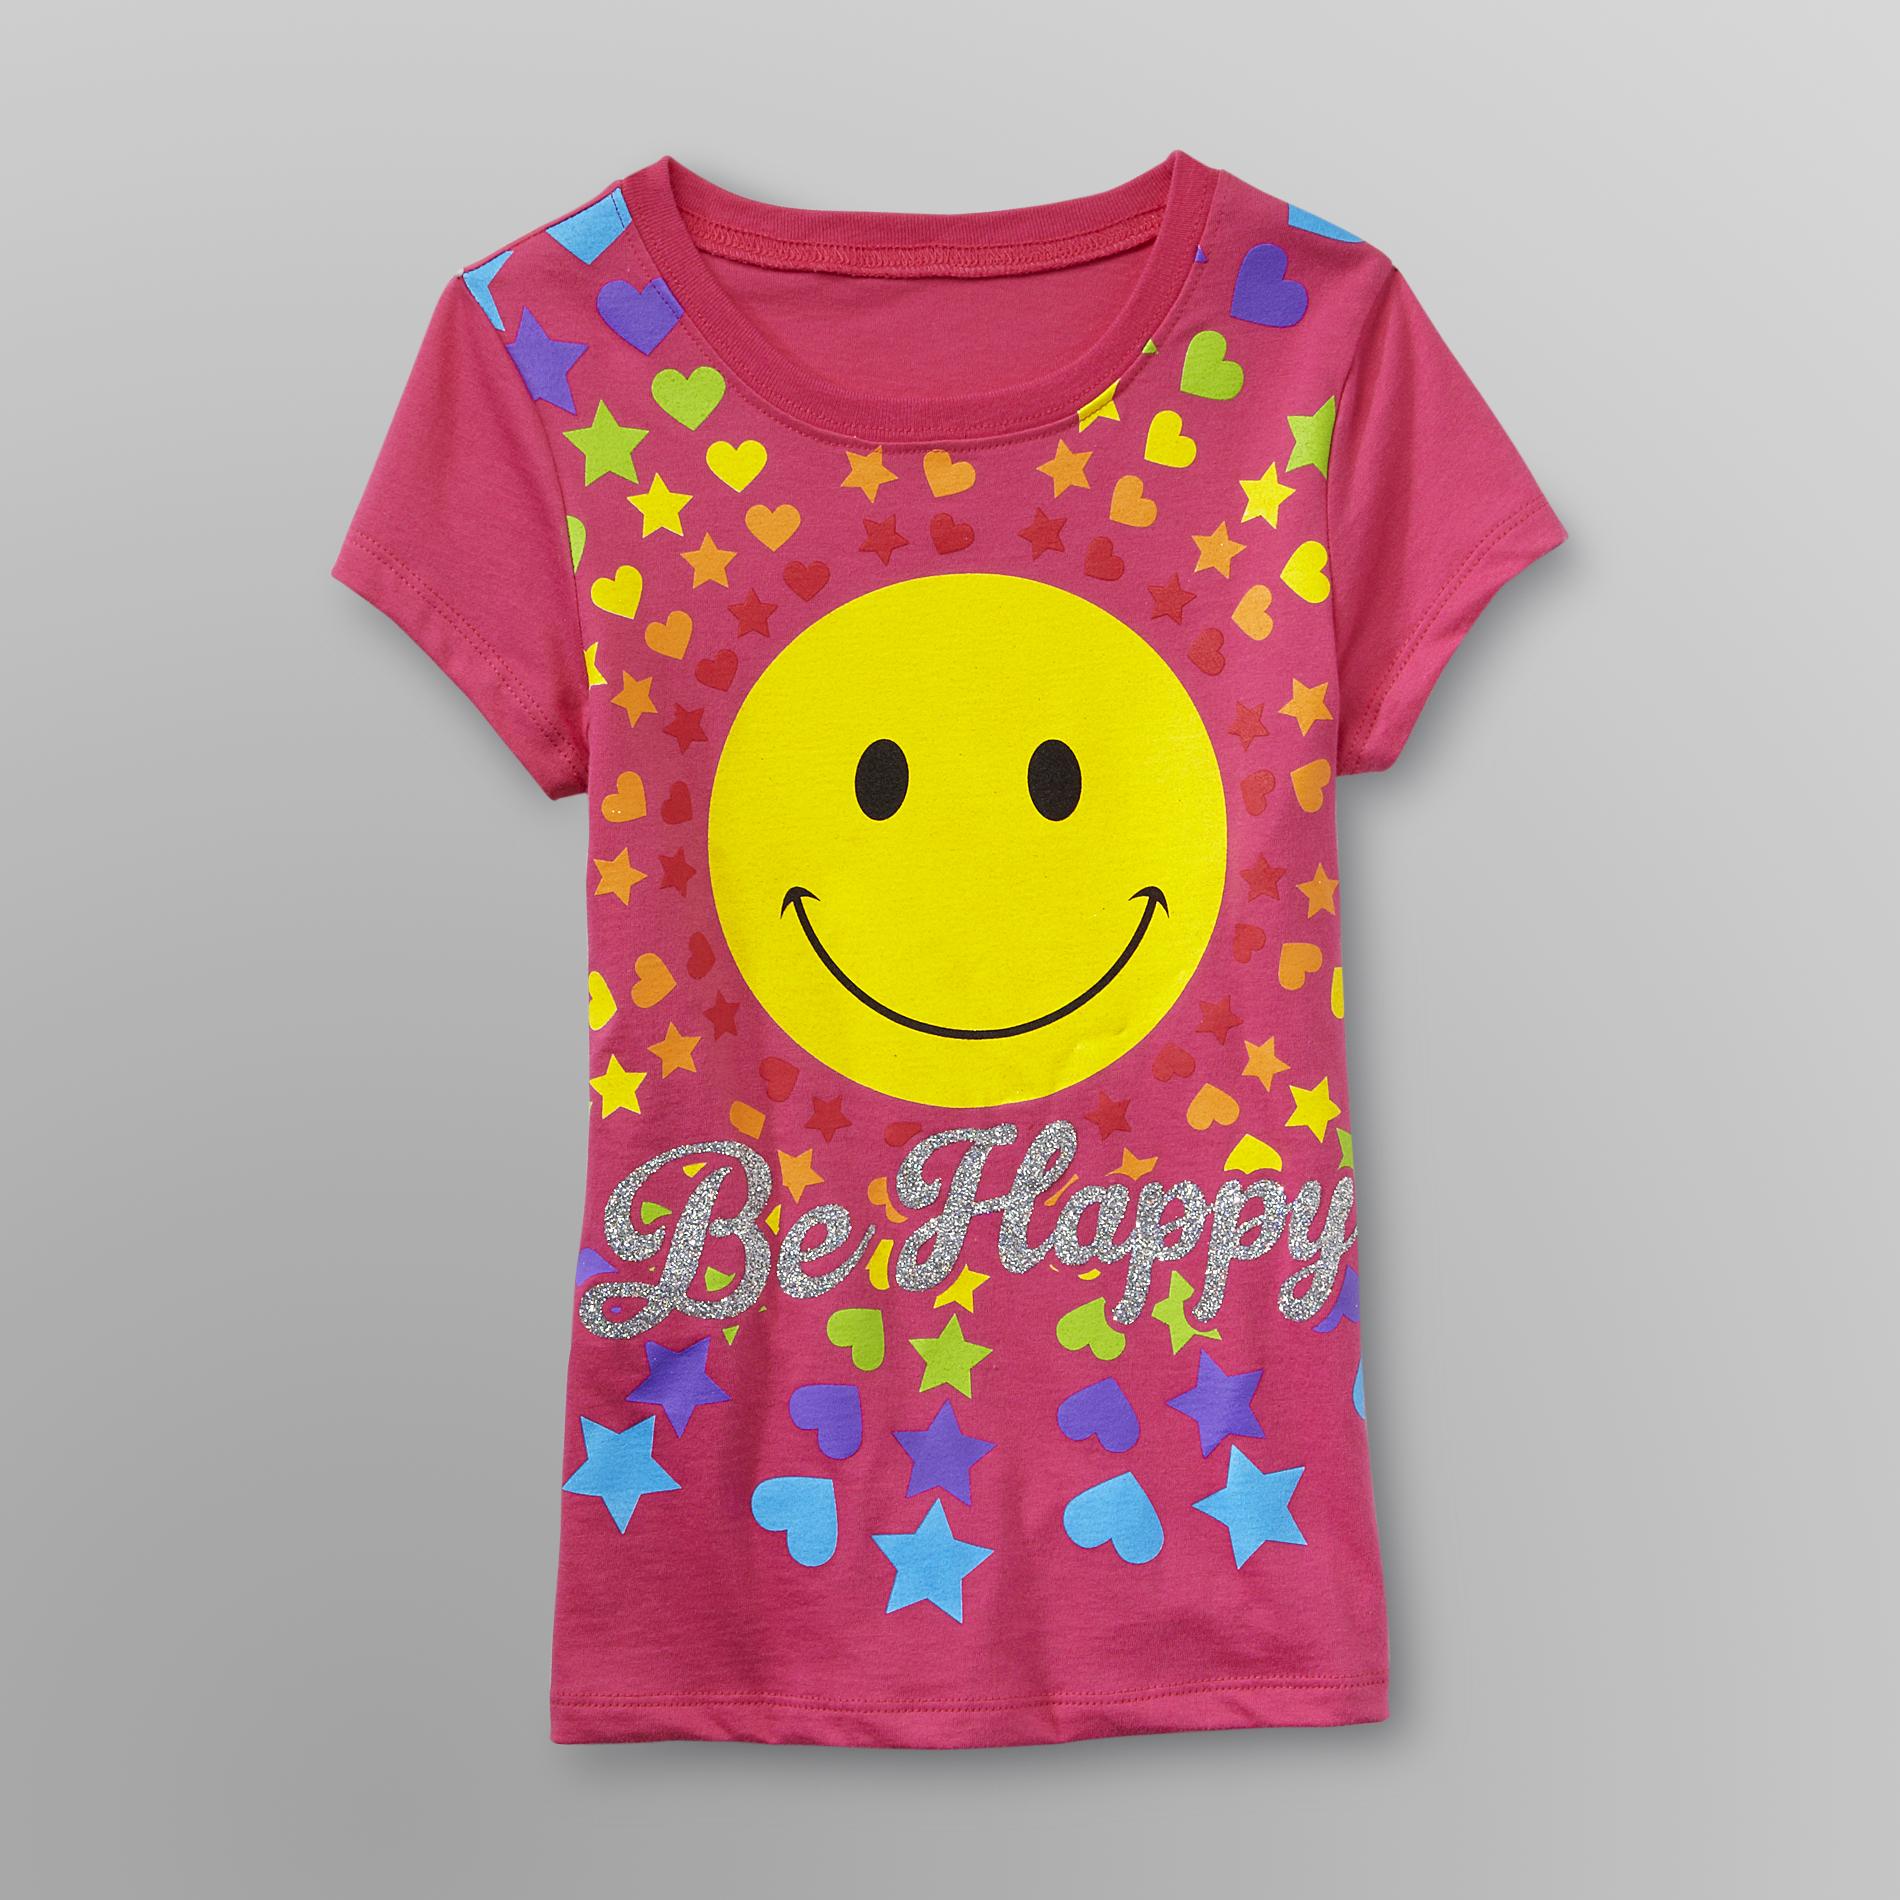 Route 66 Girl's Graphic T-Shirt - Smiley Face